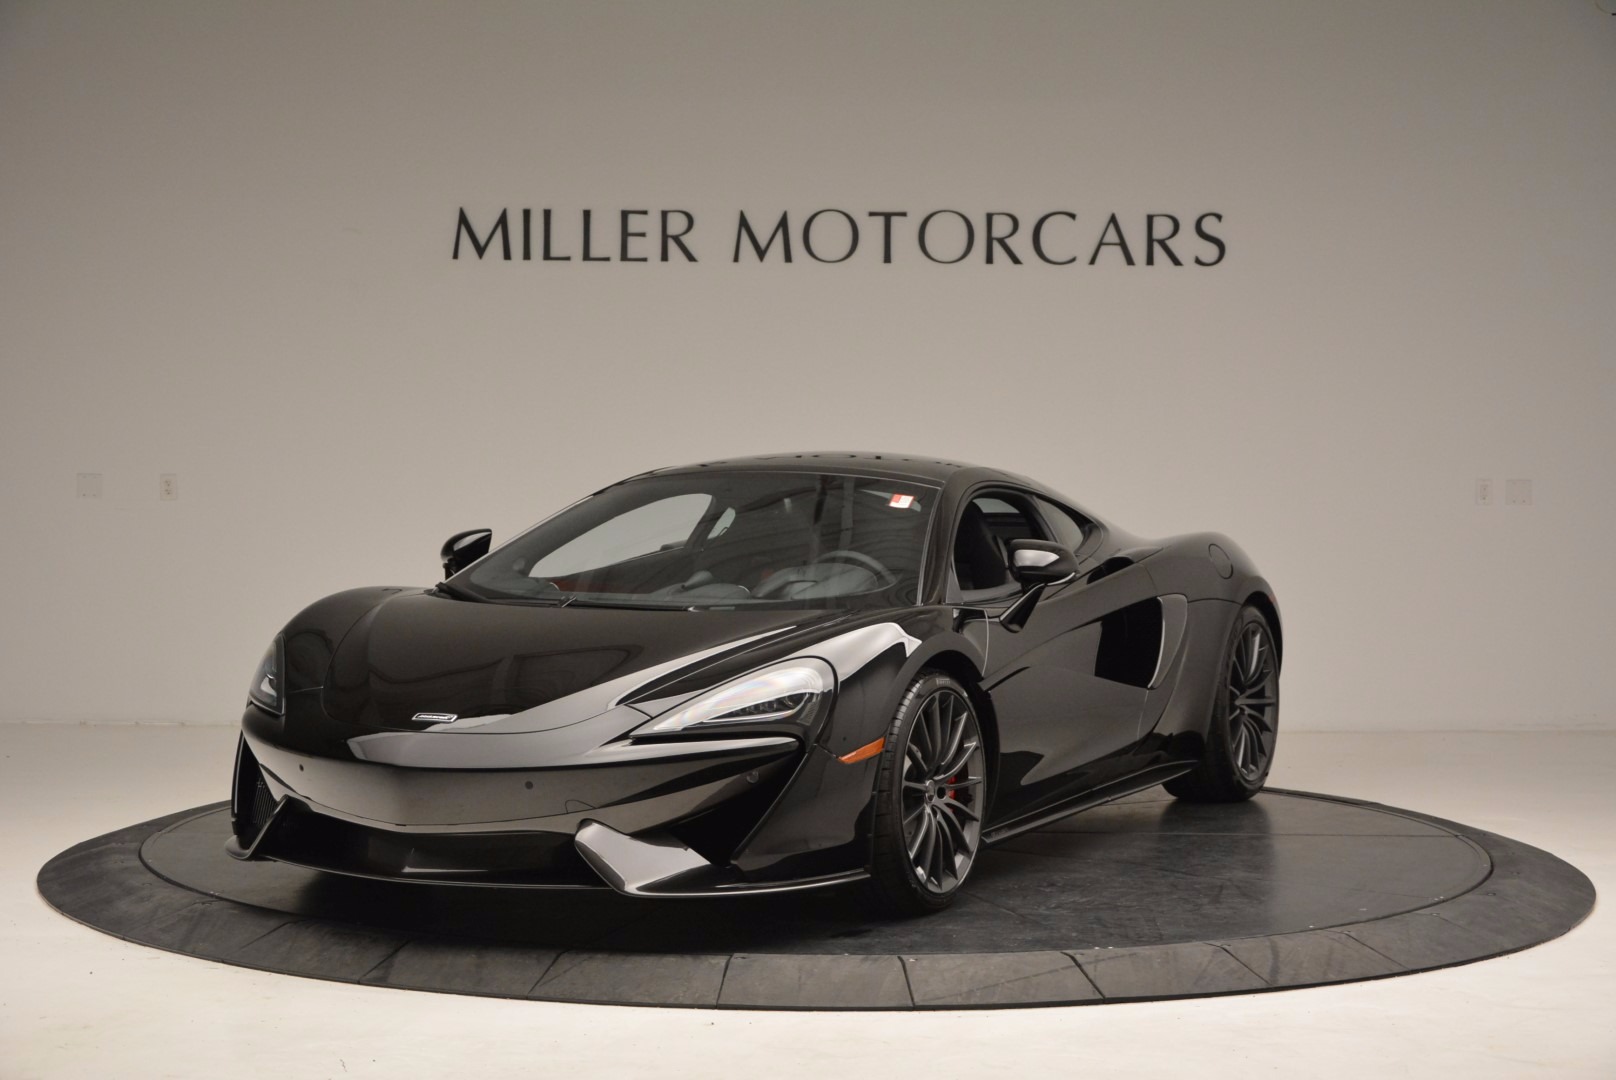 Used 2017 McLaren 570GT for sale Sold at Bentley Greenwich in Greenwich CT 06830 1